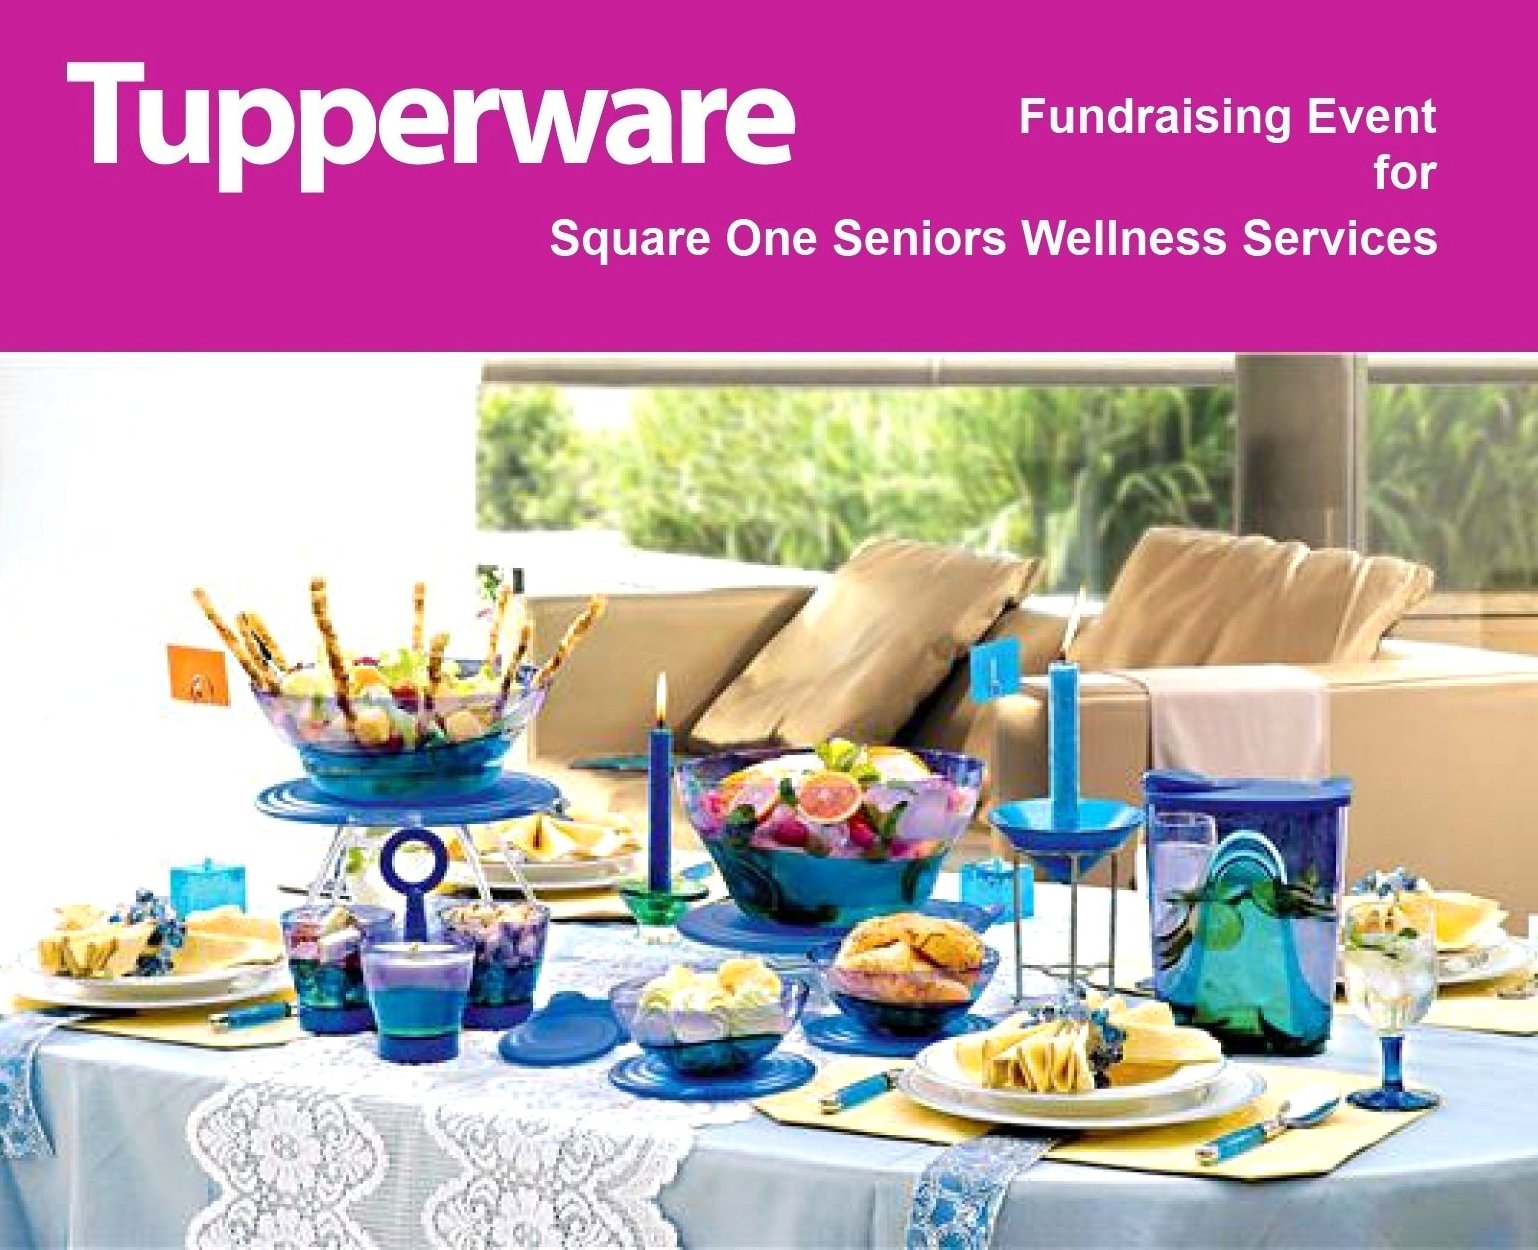 Tupperware Google image from http://www.omg-brands.com/product_images/uploaded_images/Tupp.jpg